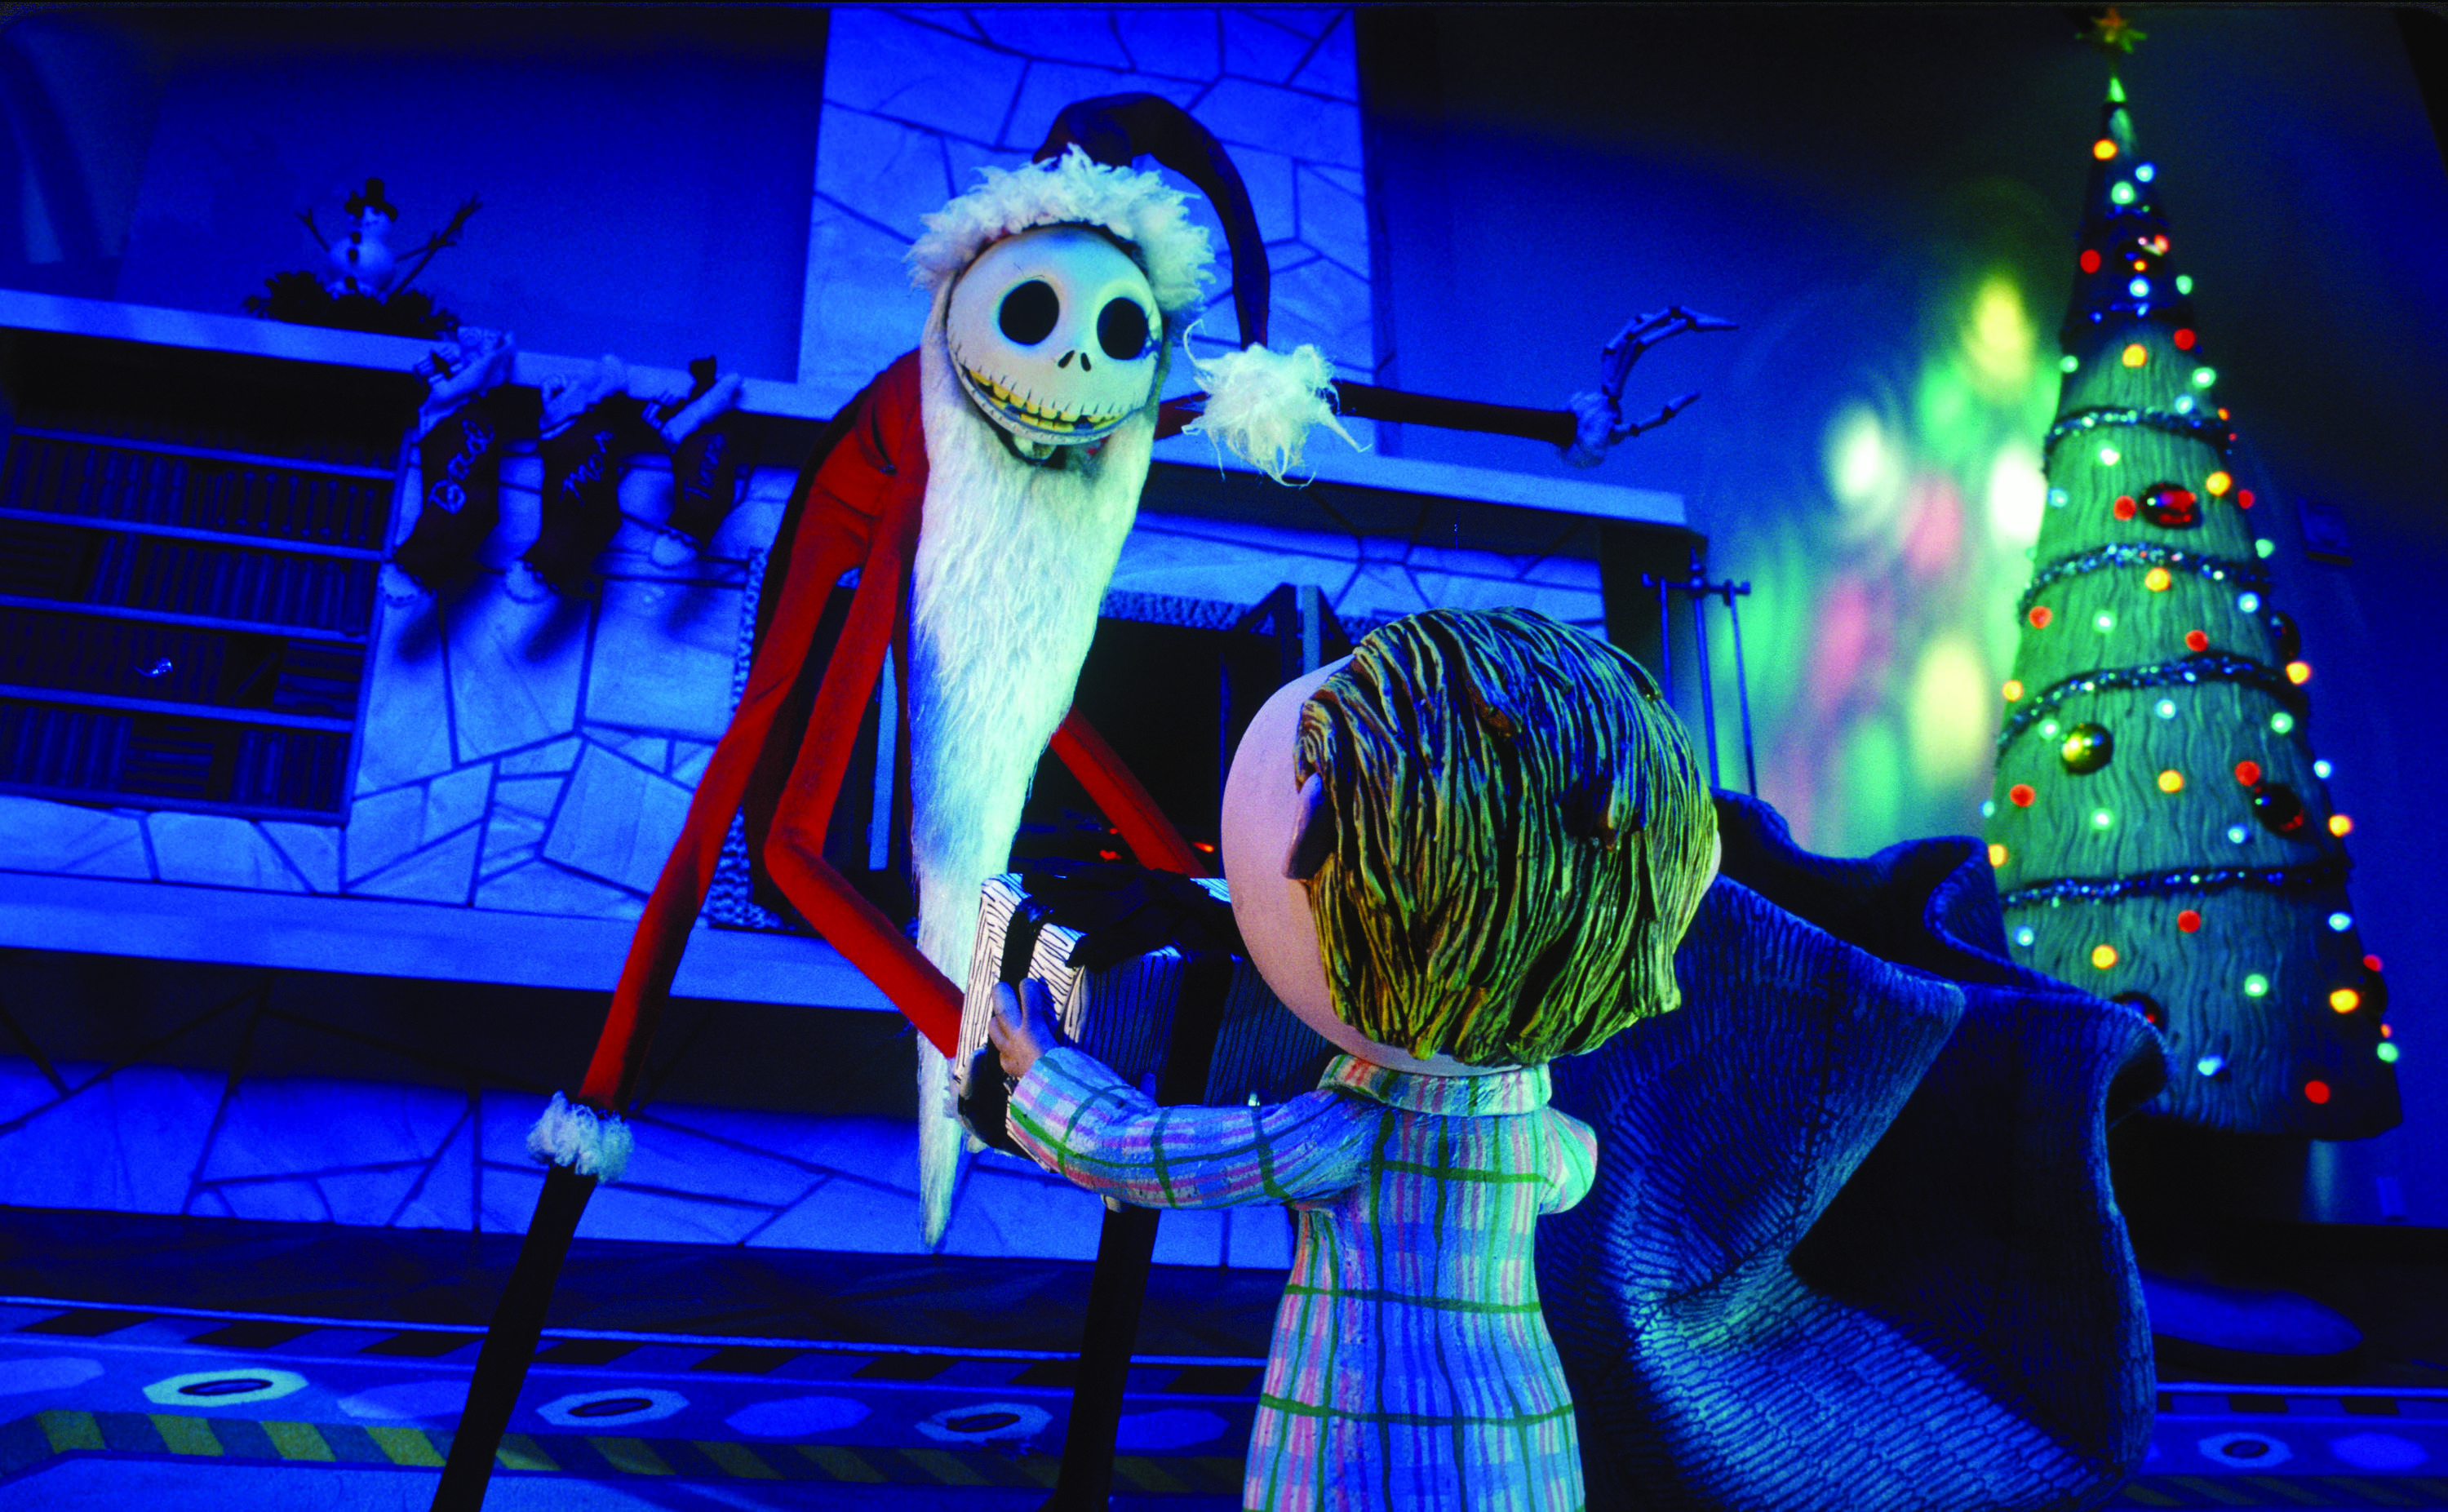 21 Best Animated Christmas Movies The Whole Family Will Enjoy